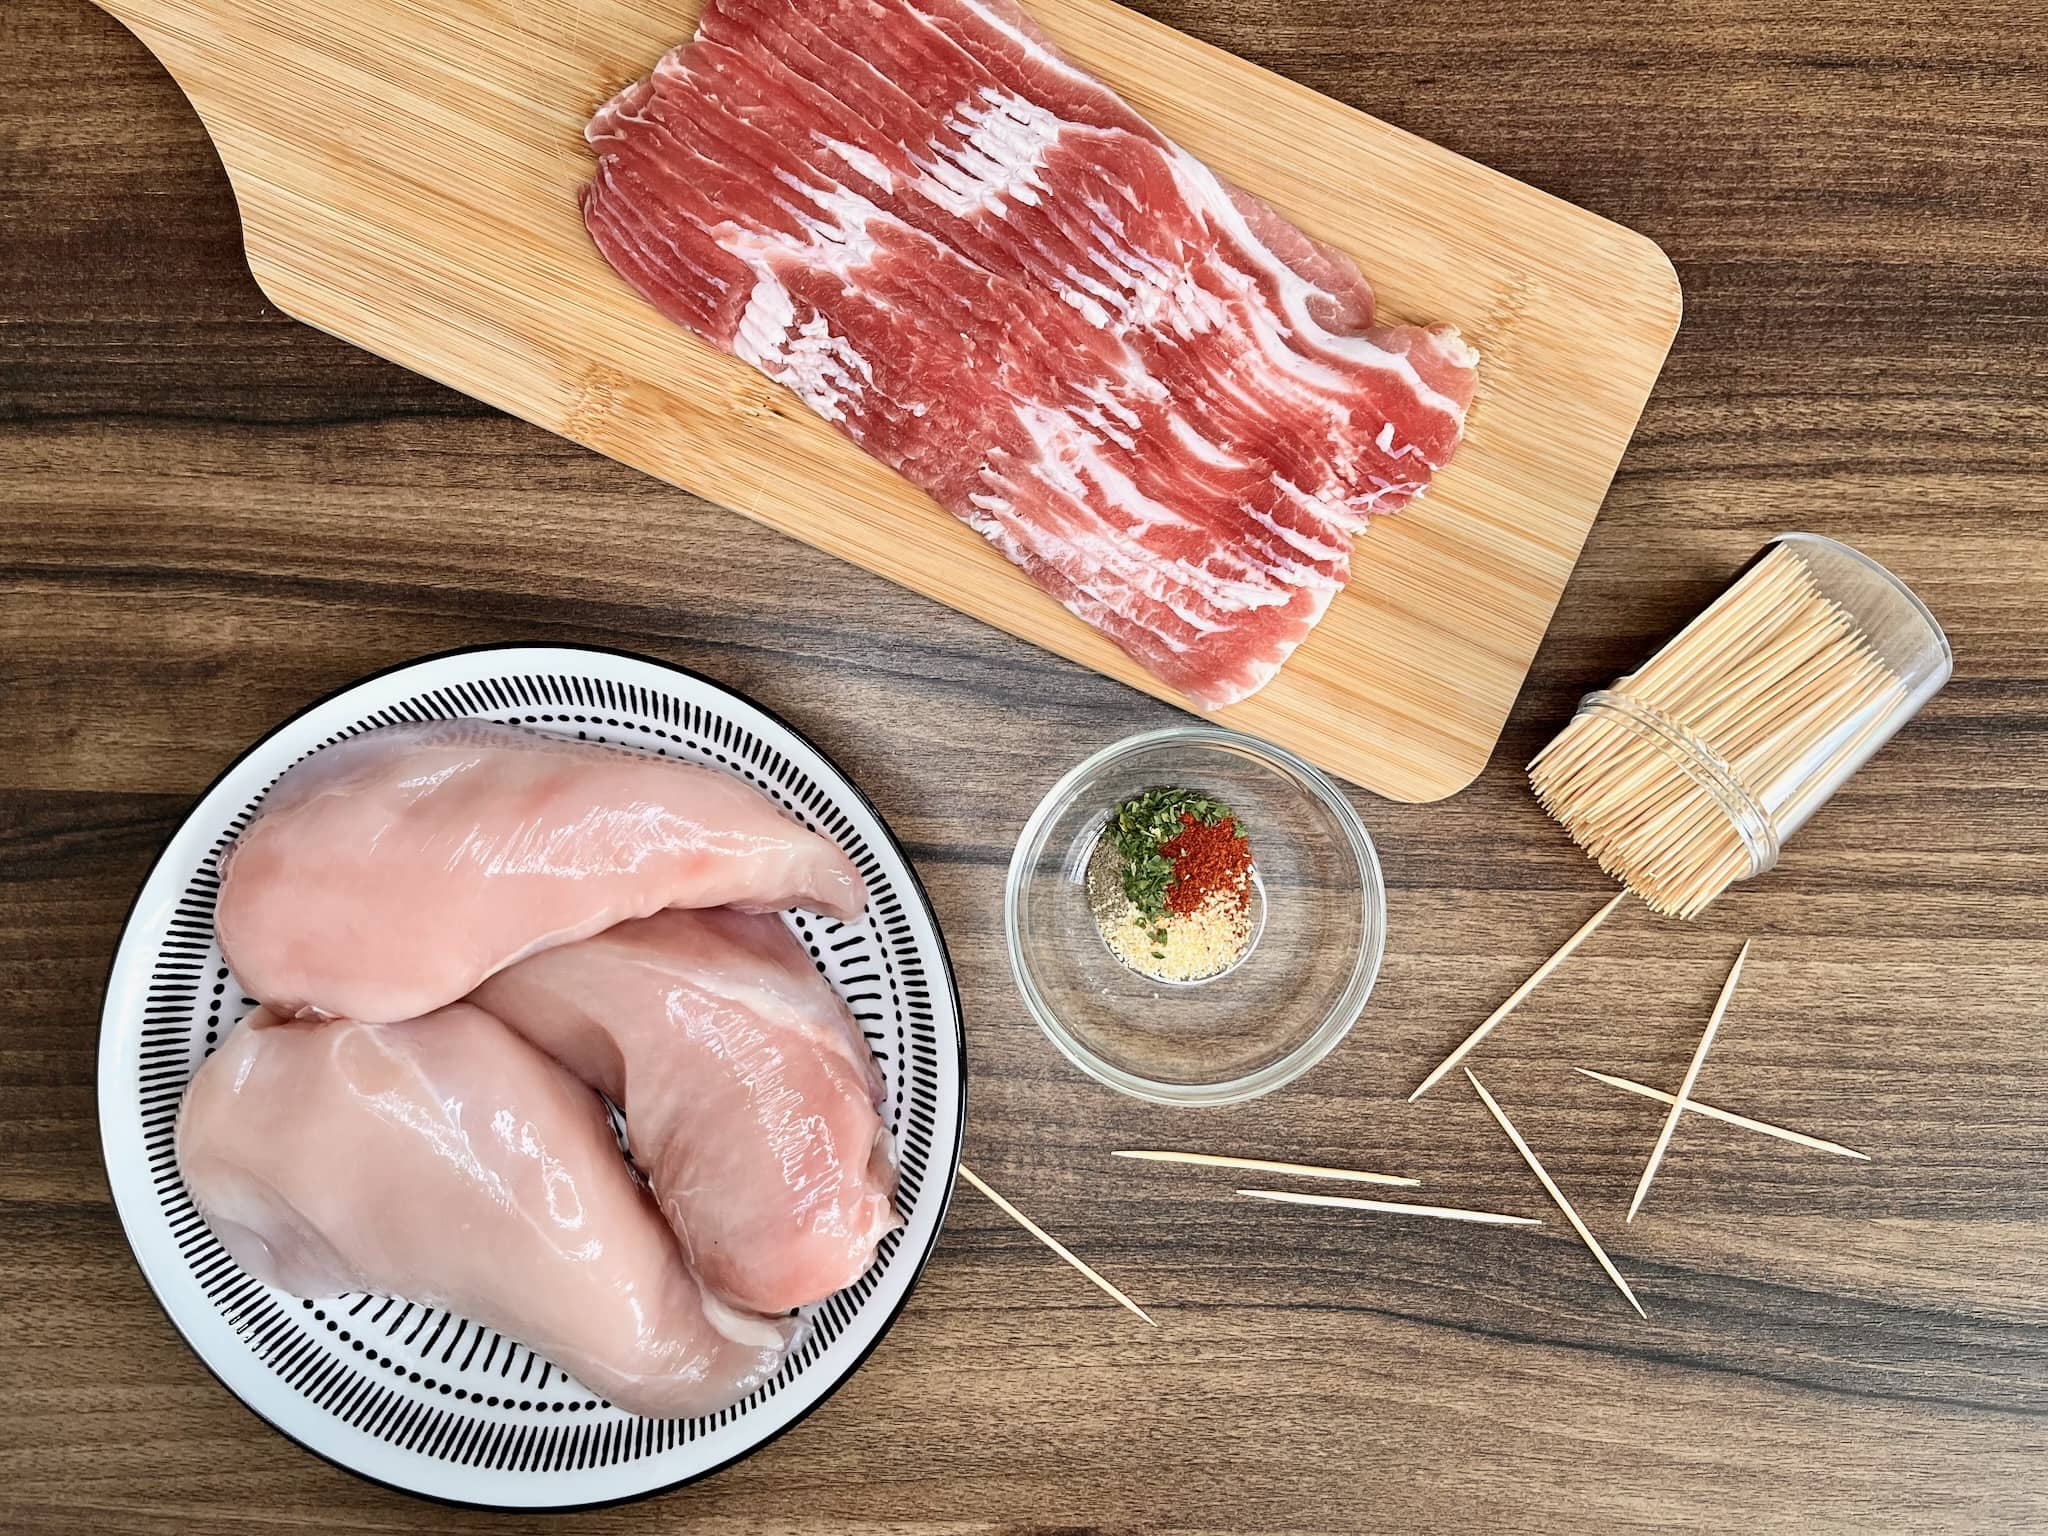 Ingredients are laid out on the tabletop, ready to prepare Bacon-Wrapped Chicken Bites